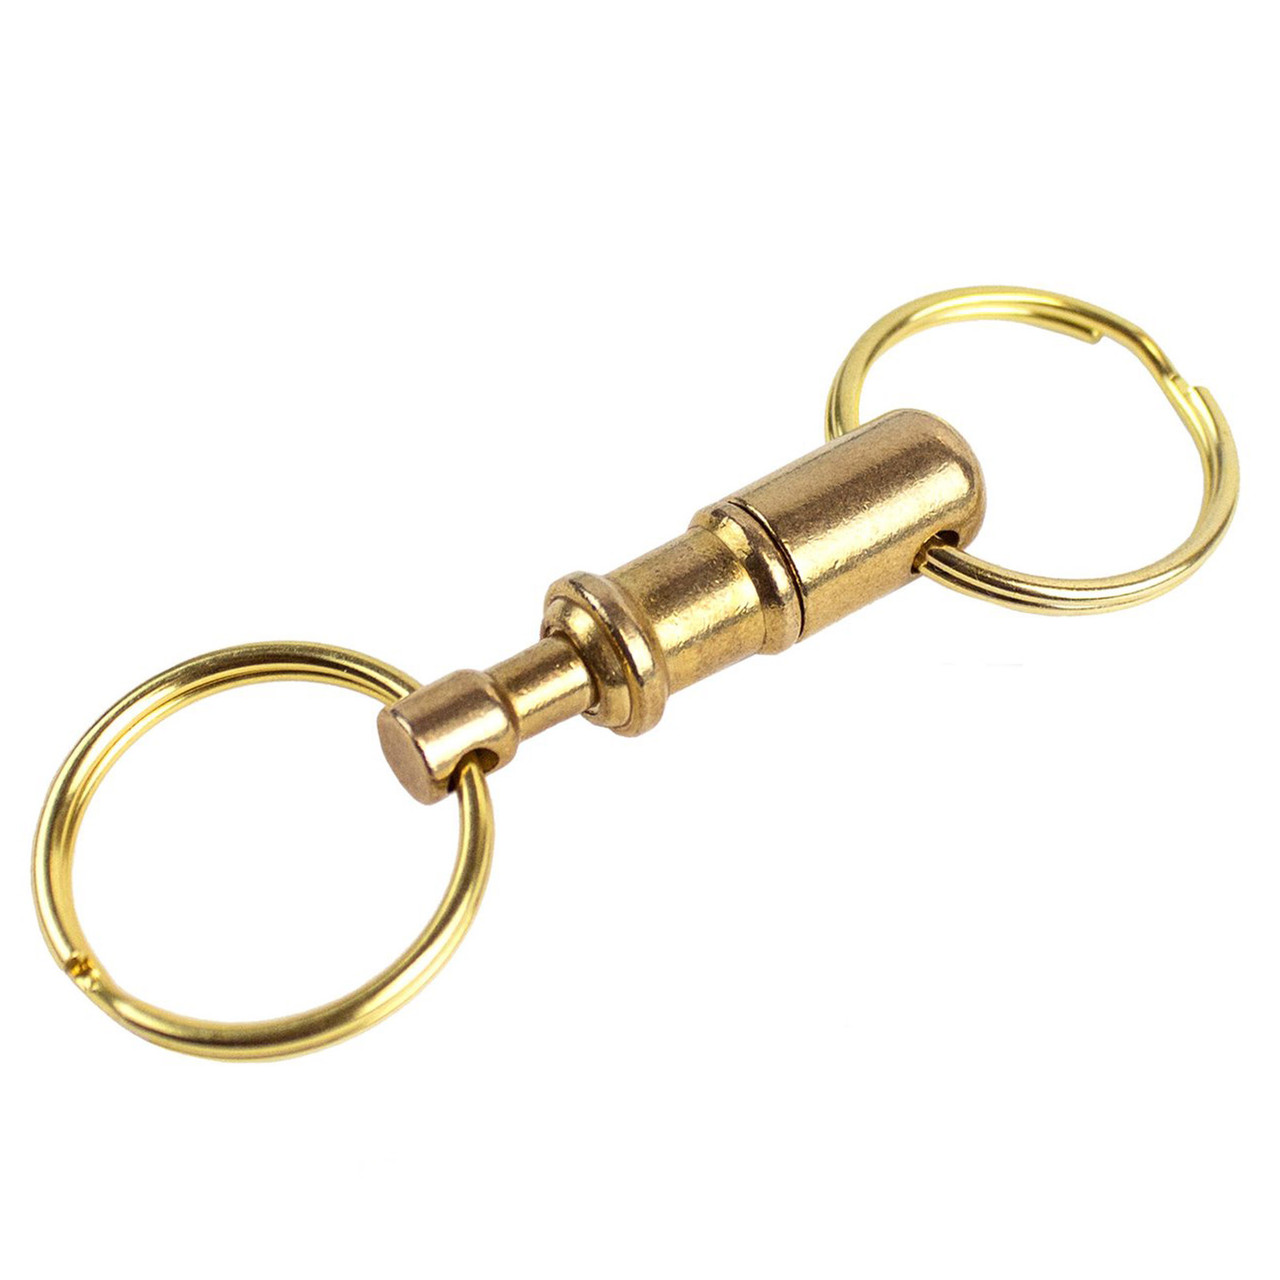 Anodized Key Ring 12/Pack